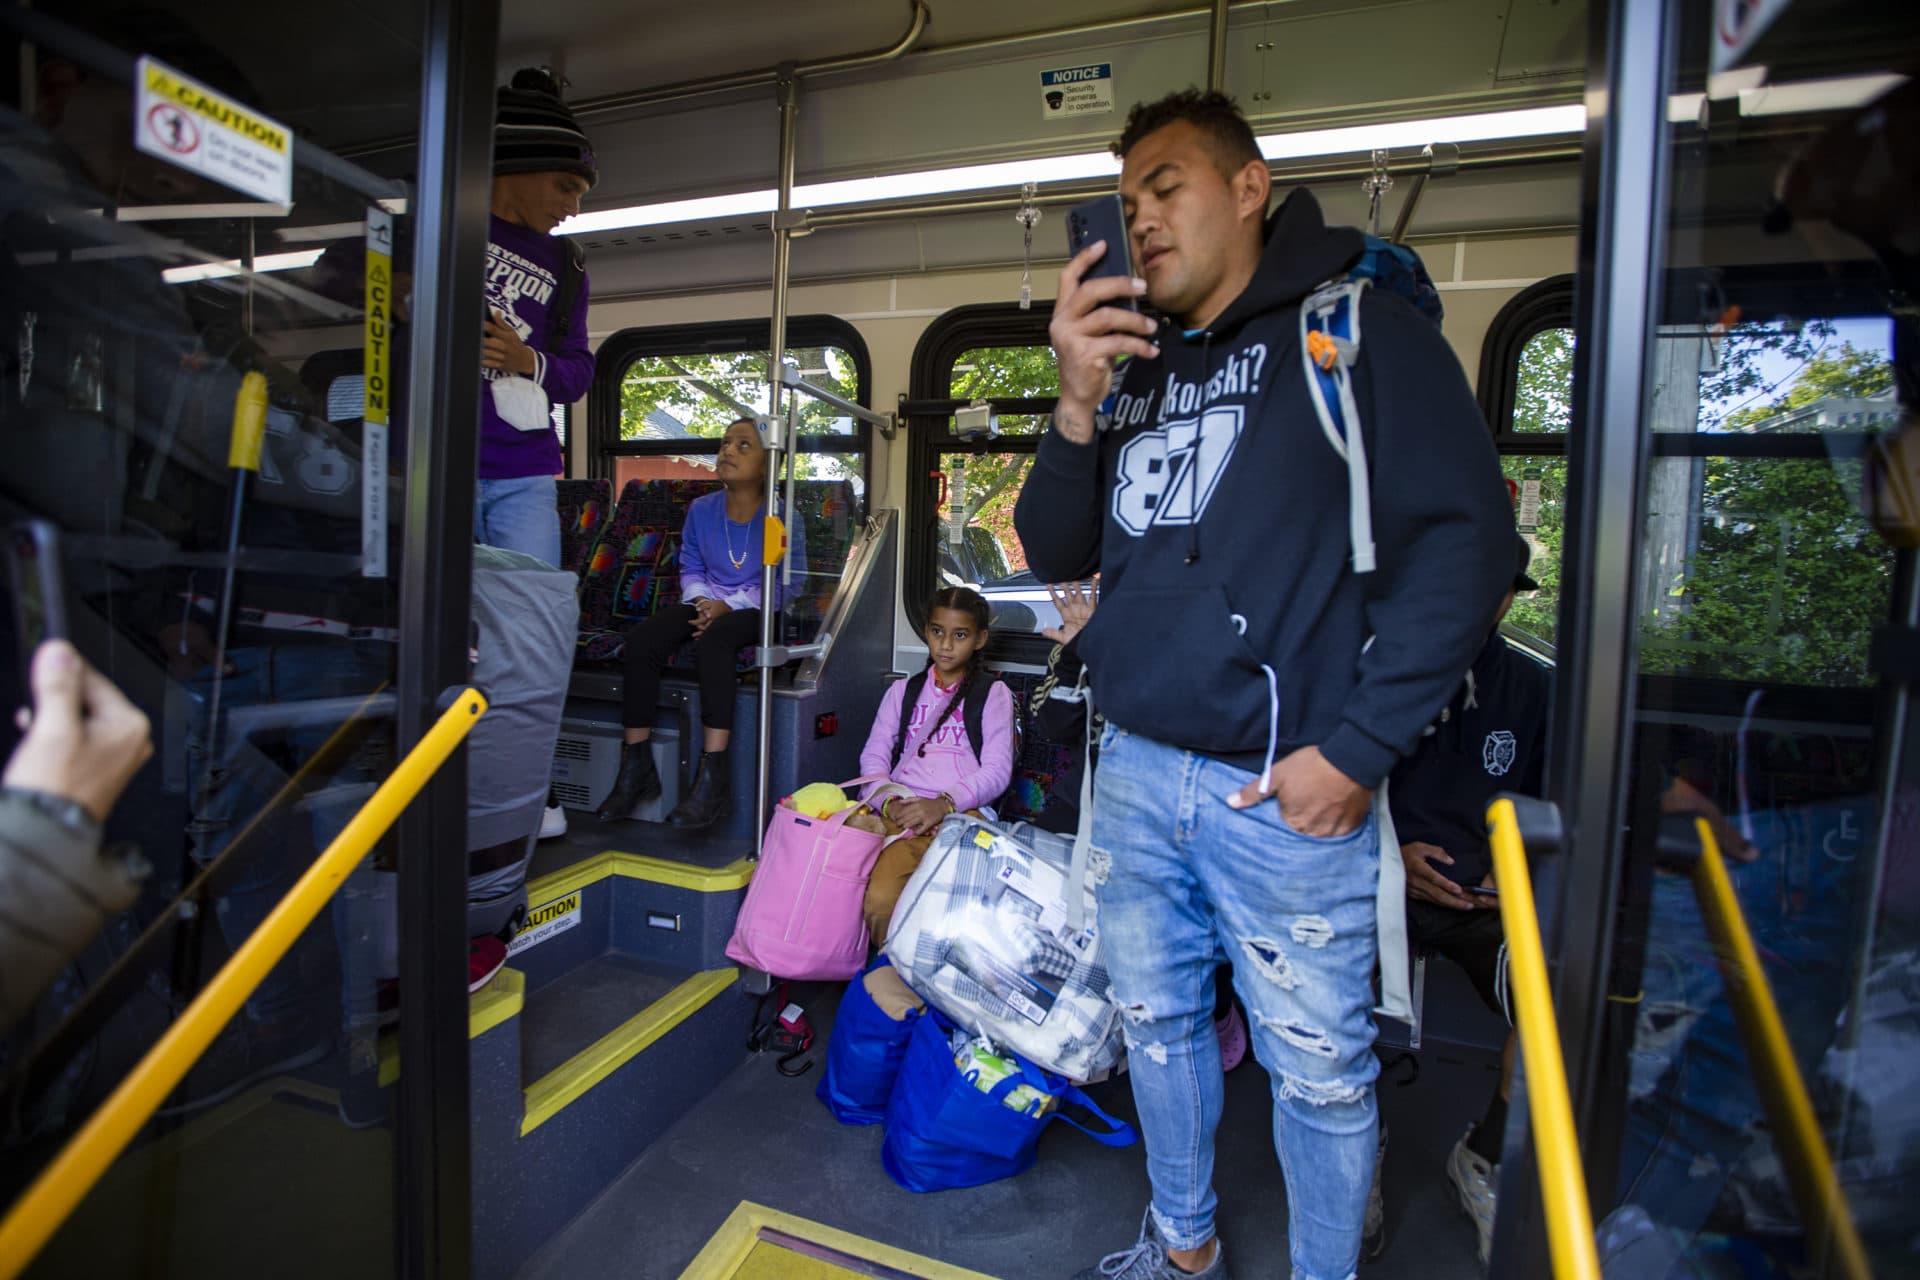 The Venezuelan immigrants board the first bus at St. Andrews Parish House as they moved to leave Martha’s Vineyard. (Jesse Costa/WBUR)